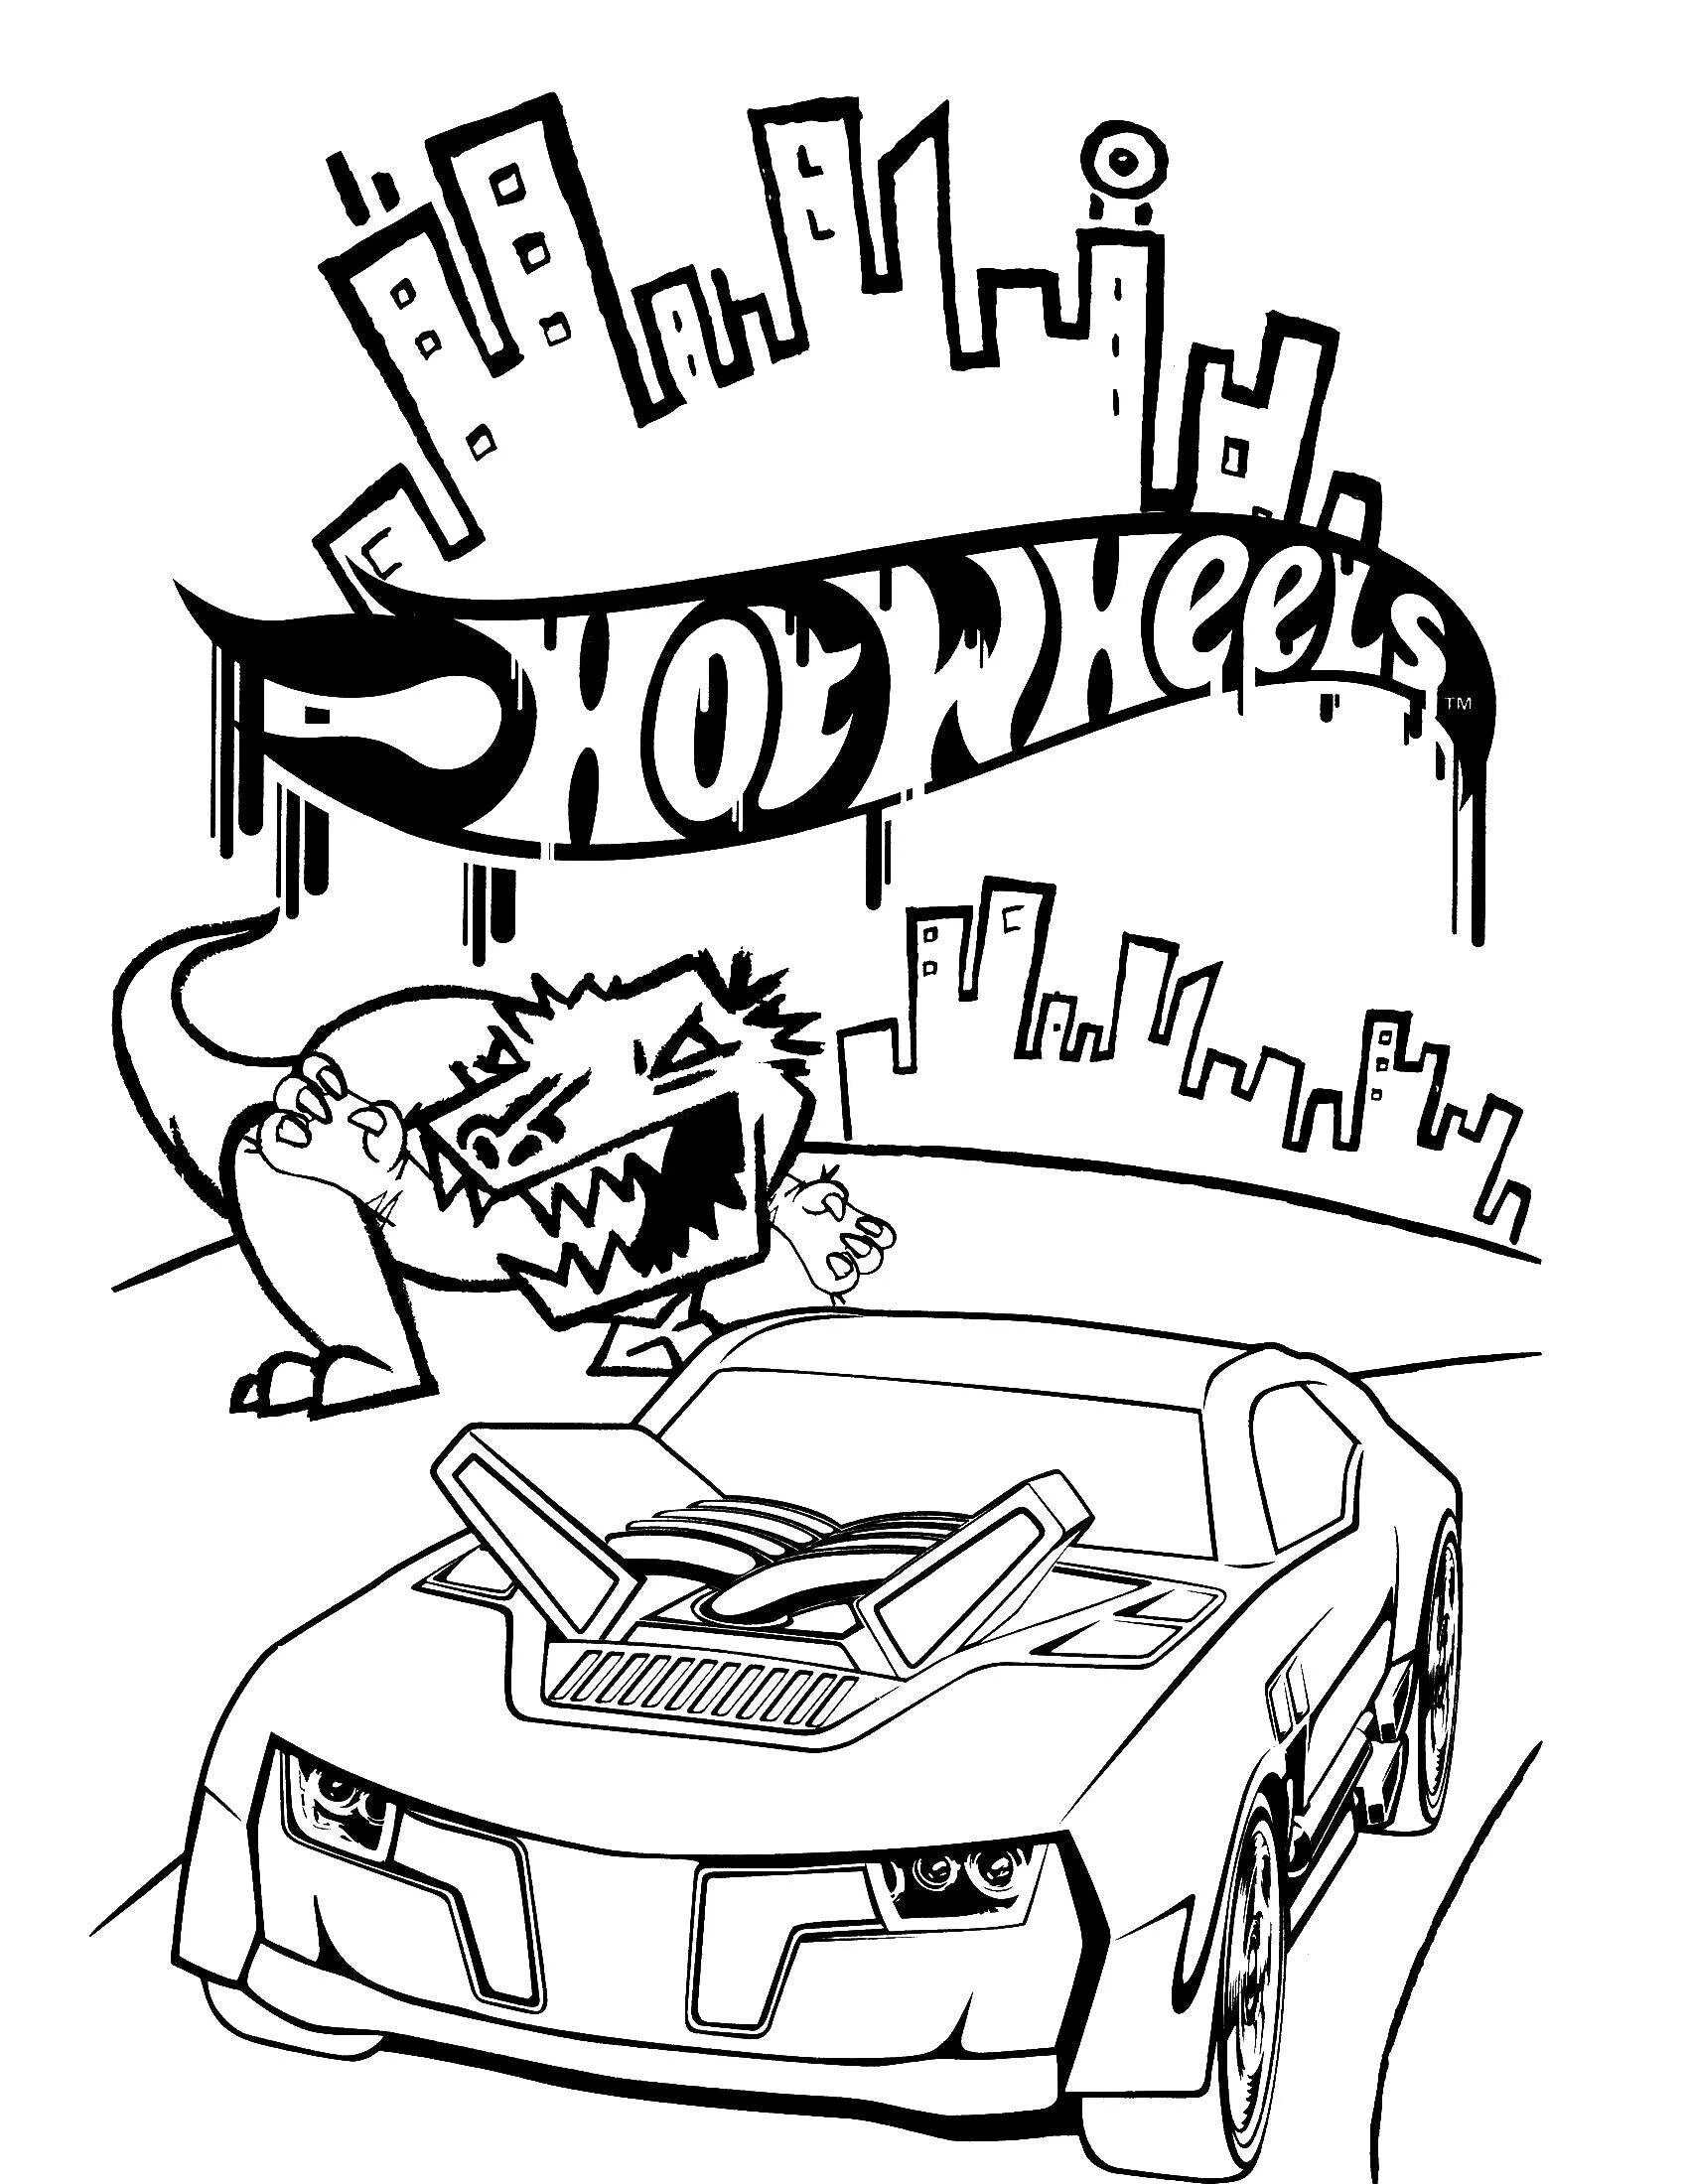 Awesome hot wheels coloring page